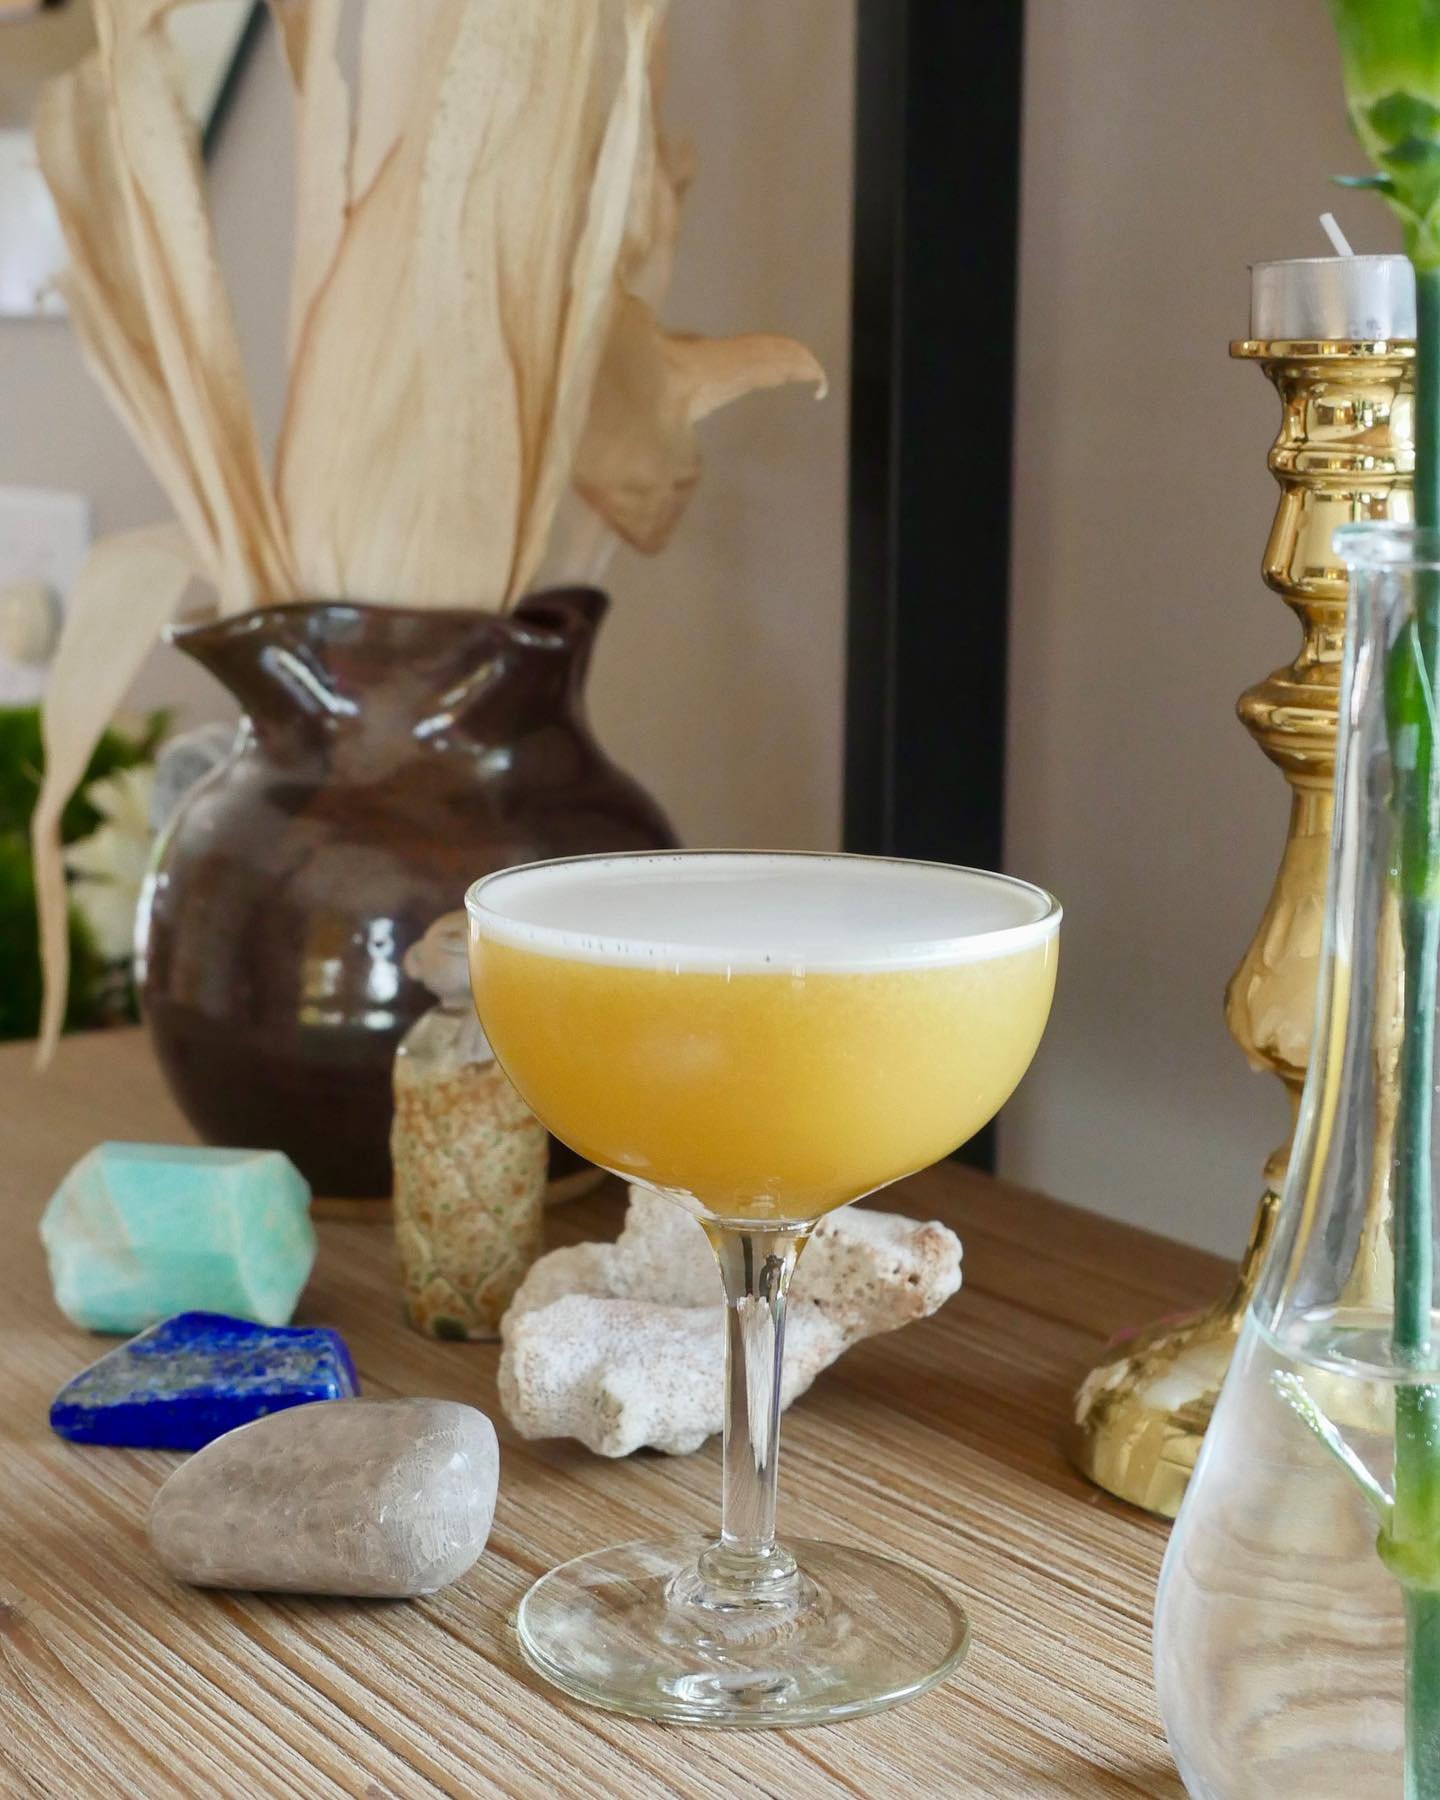 Happy Hump Day!

You already what time it is, it&rsquo;s hump day elixir cocktail hour!

Featuring:

&ldquo;Dimes, Limes &amp; Uncertain Times&rdquo;

A rich, layered cocktail with notes of maple, vanilla, orange, lime and botanicals.

A delicious co